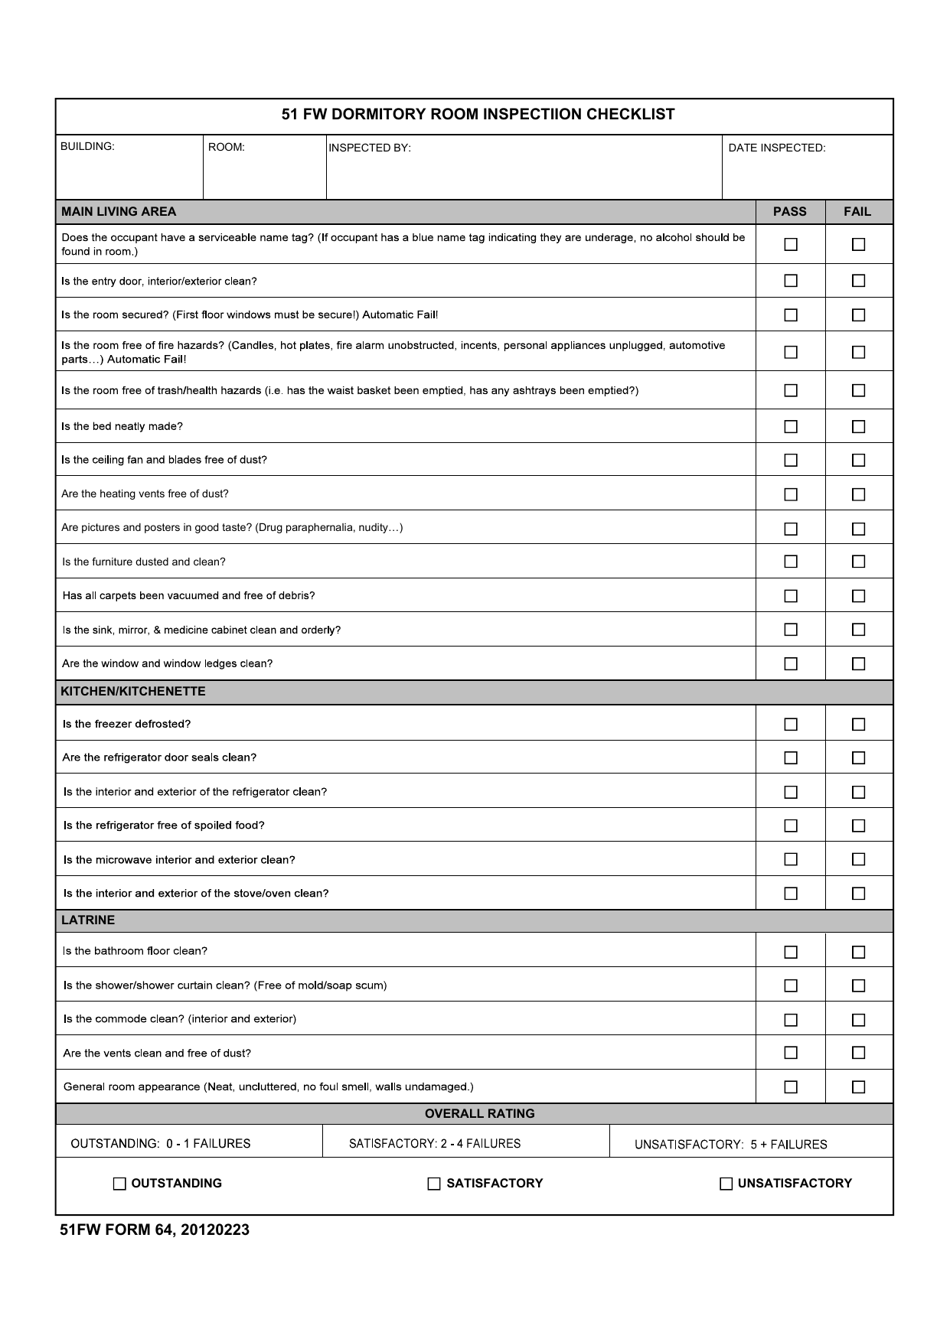 51 FW Form 64 51fw Dormitory Room Inspection Checklist, Page 1